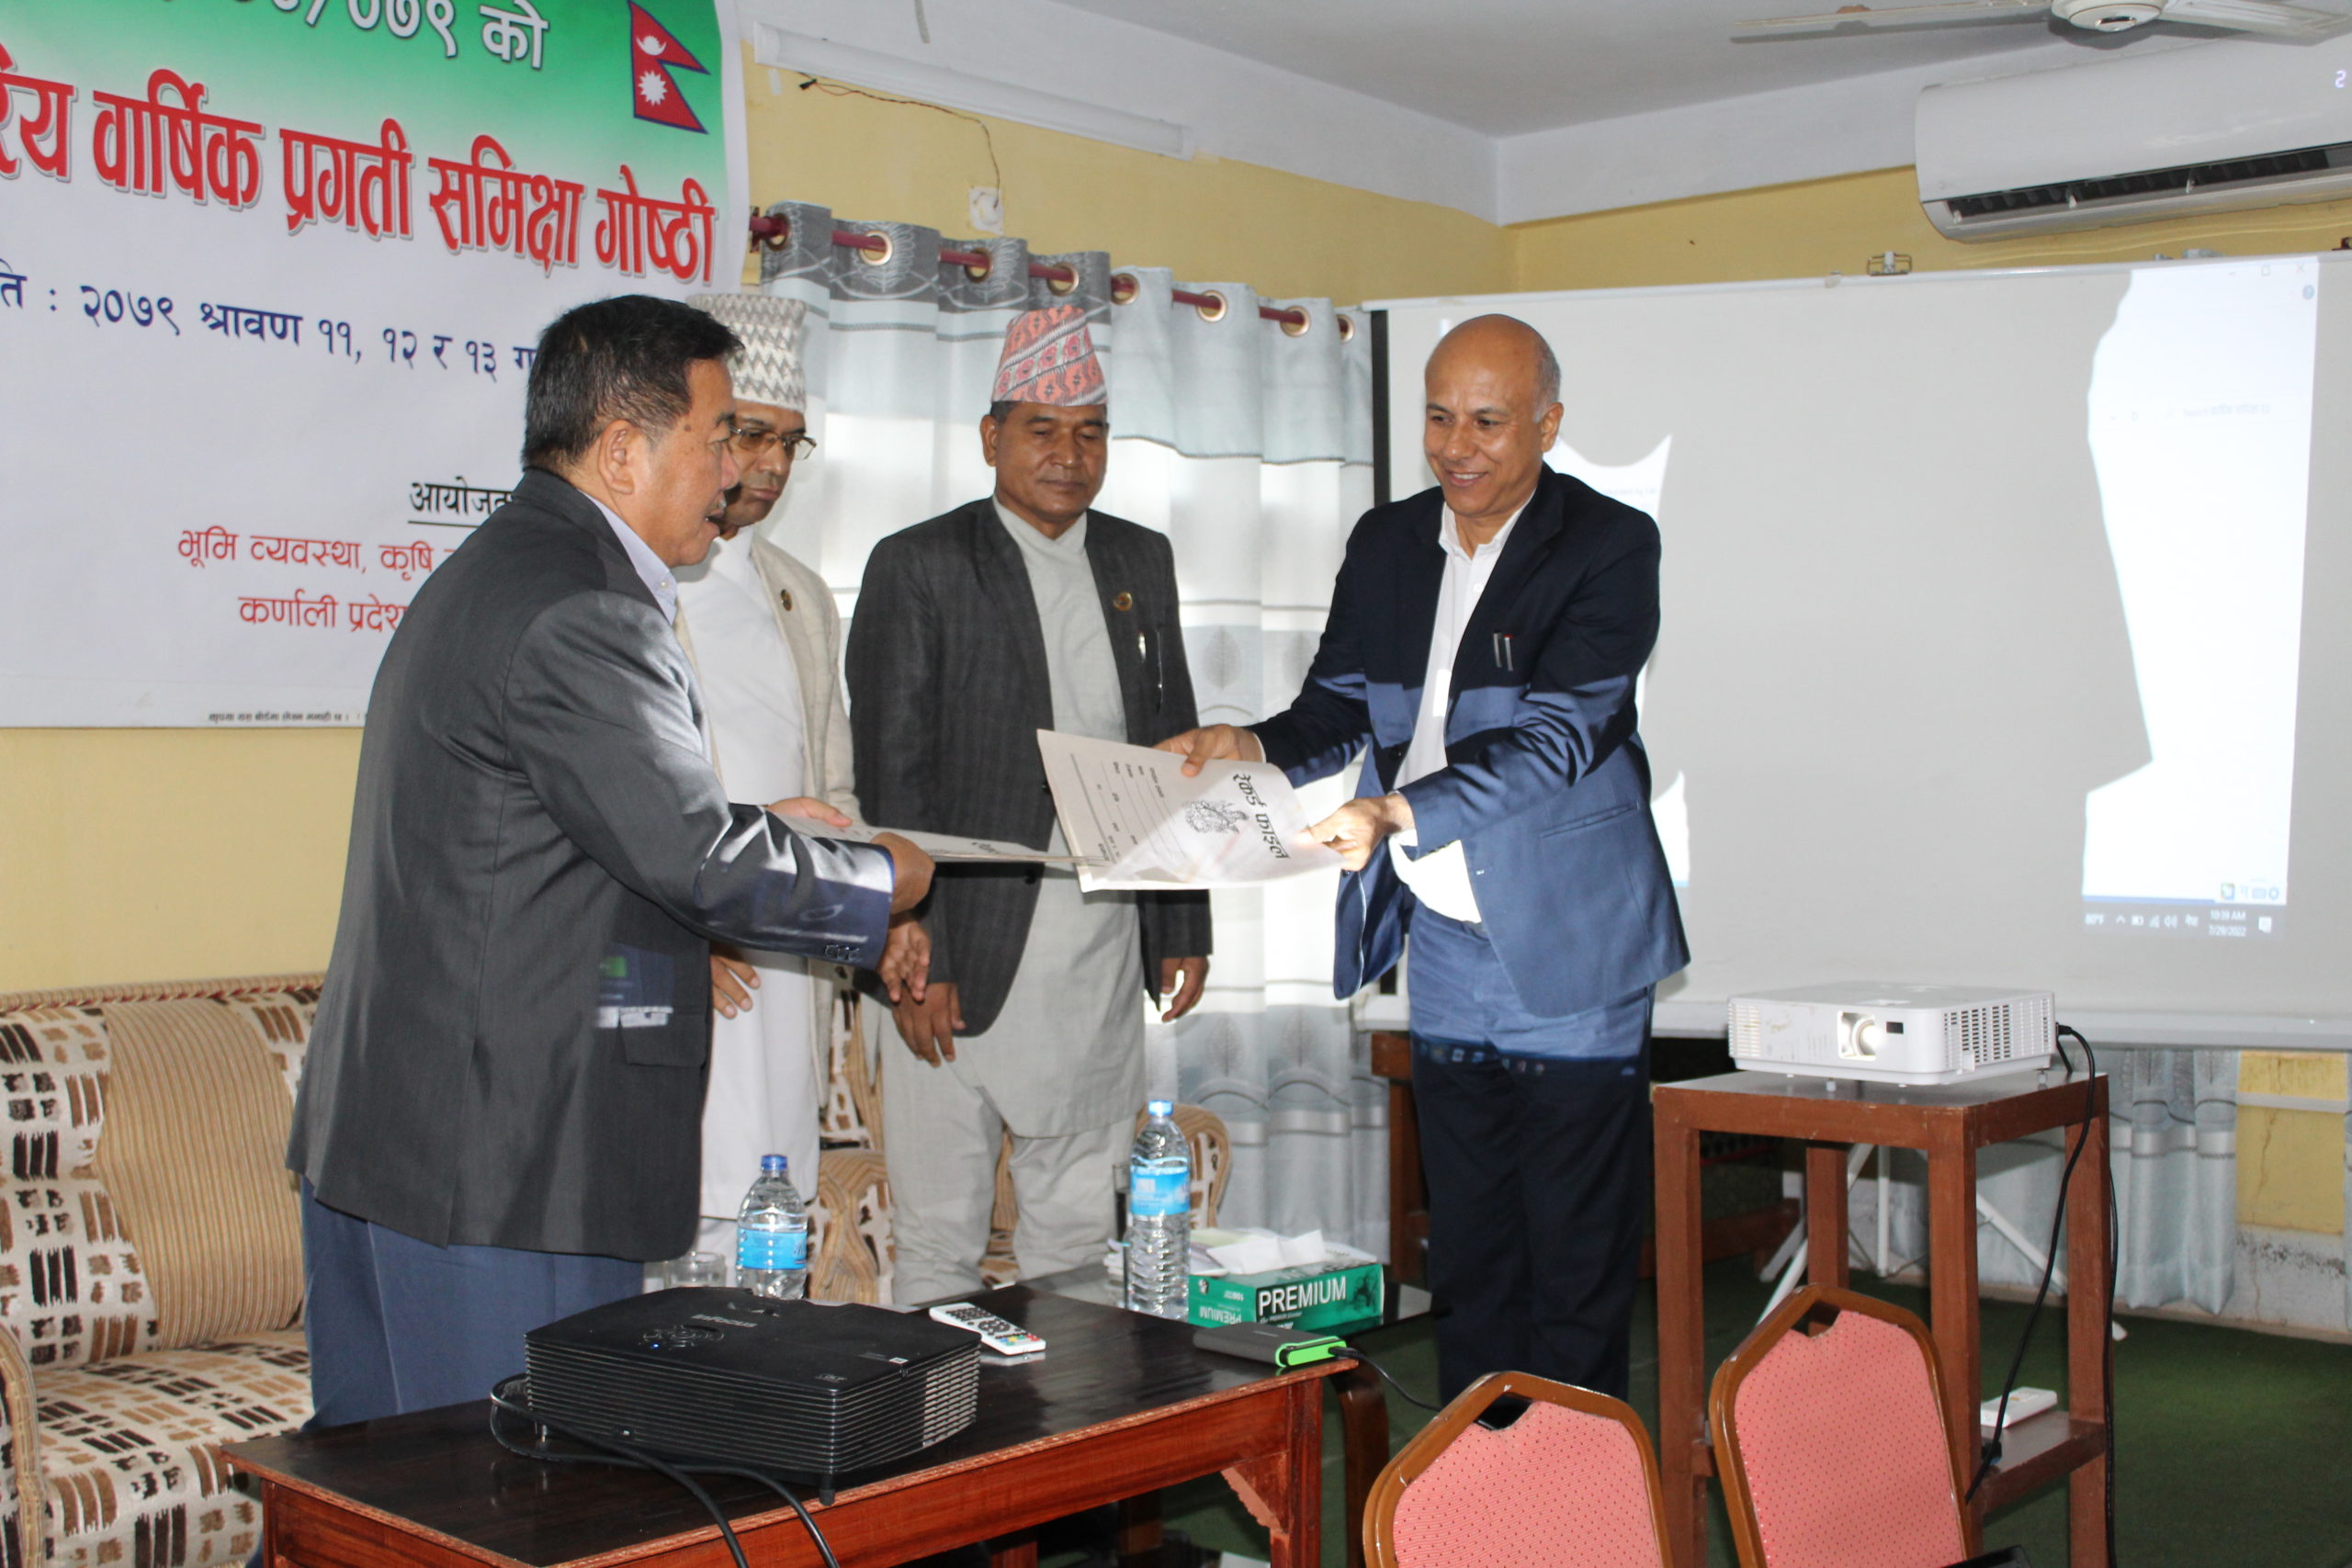 LI-BIRD Initiated a Formal Relationship with the Ministry of Land Management, Agriculture and Cooperative (MoLMAC), Karnali Province Through a Memorandum of Understating (MoU)